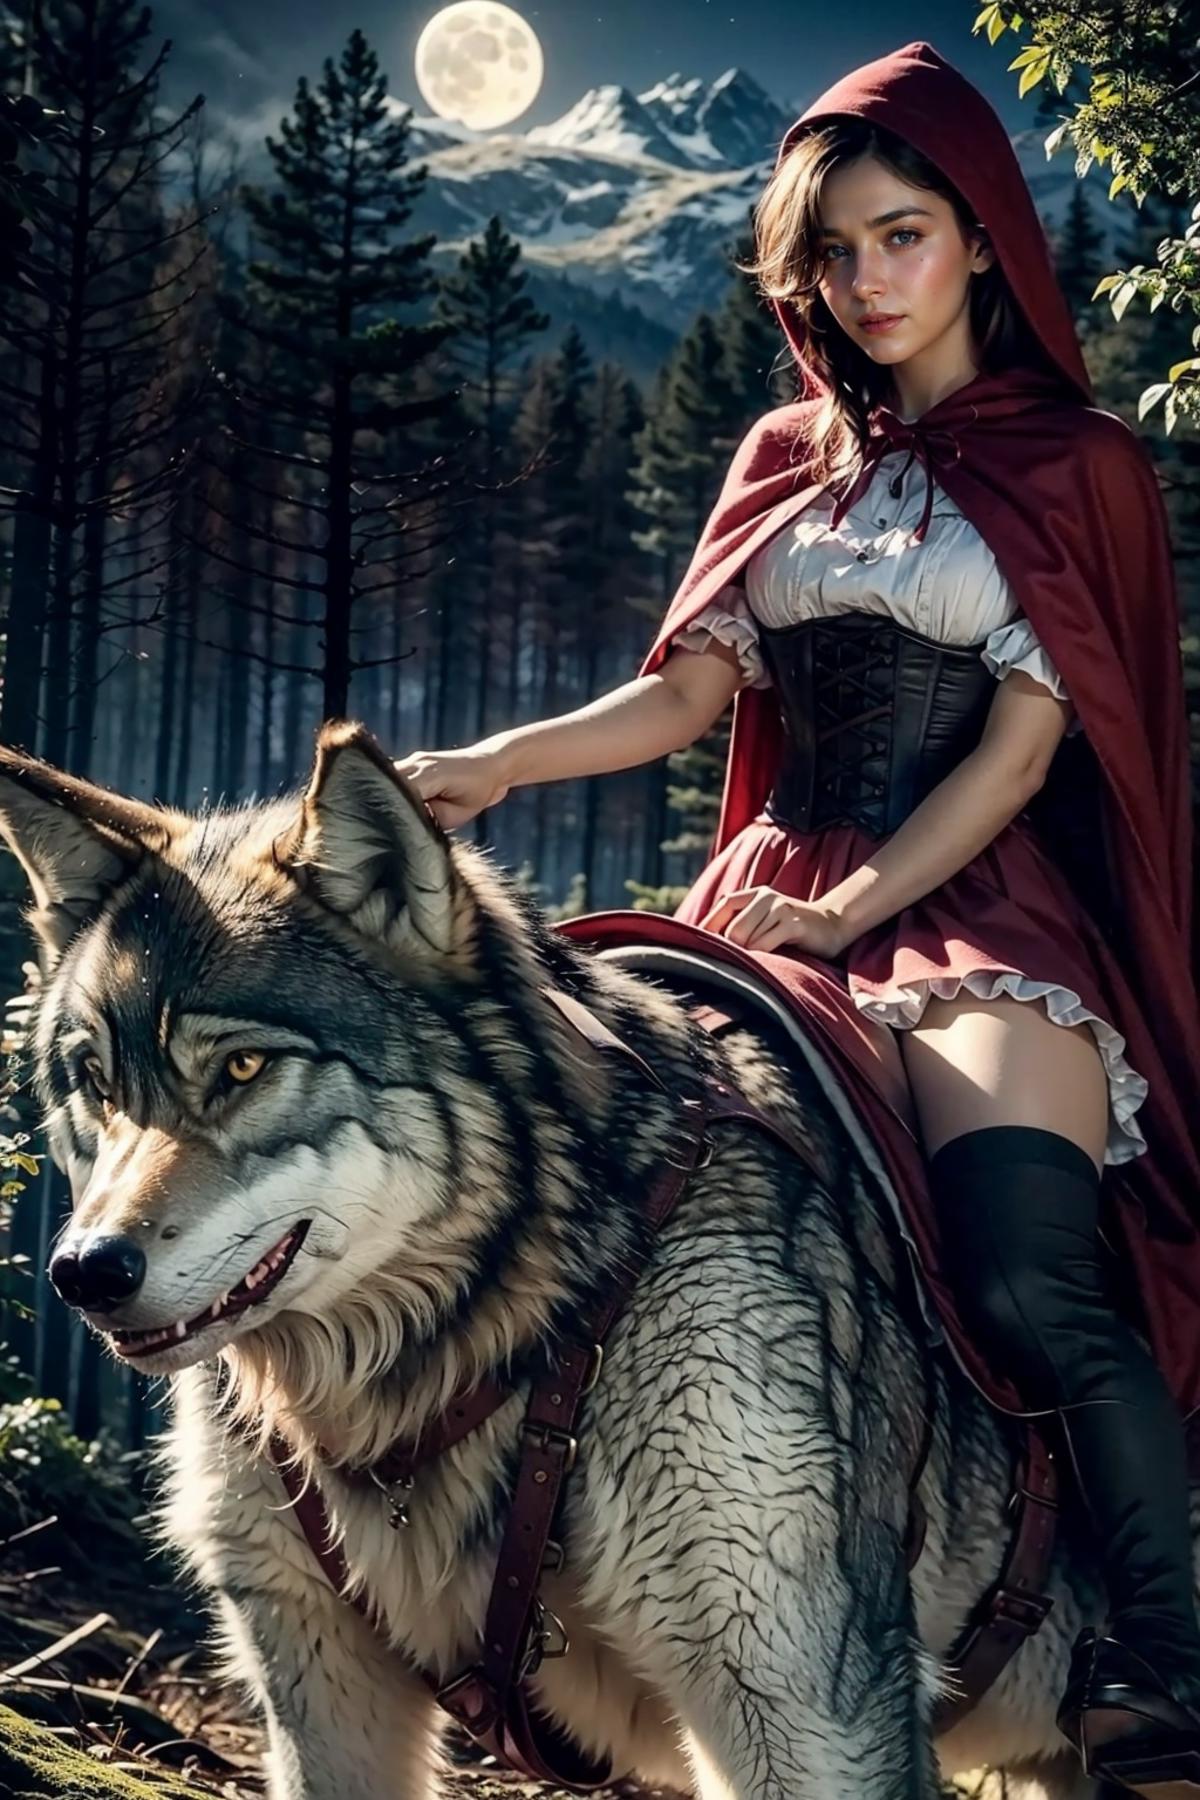 Little red riding hood image by feetie